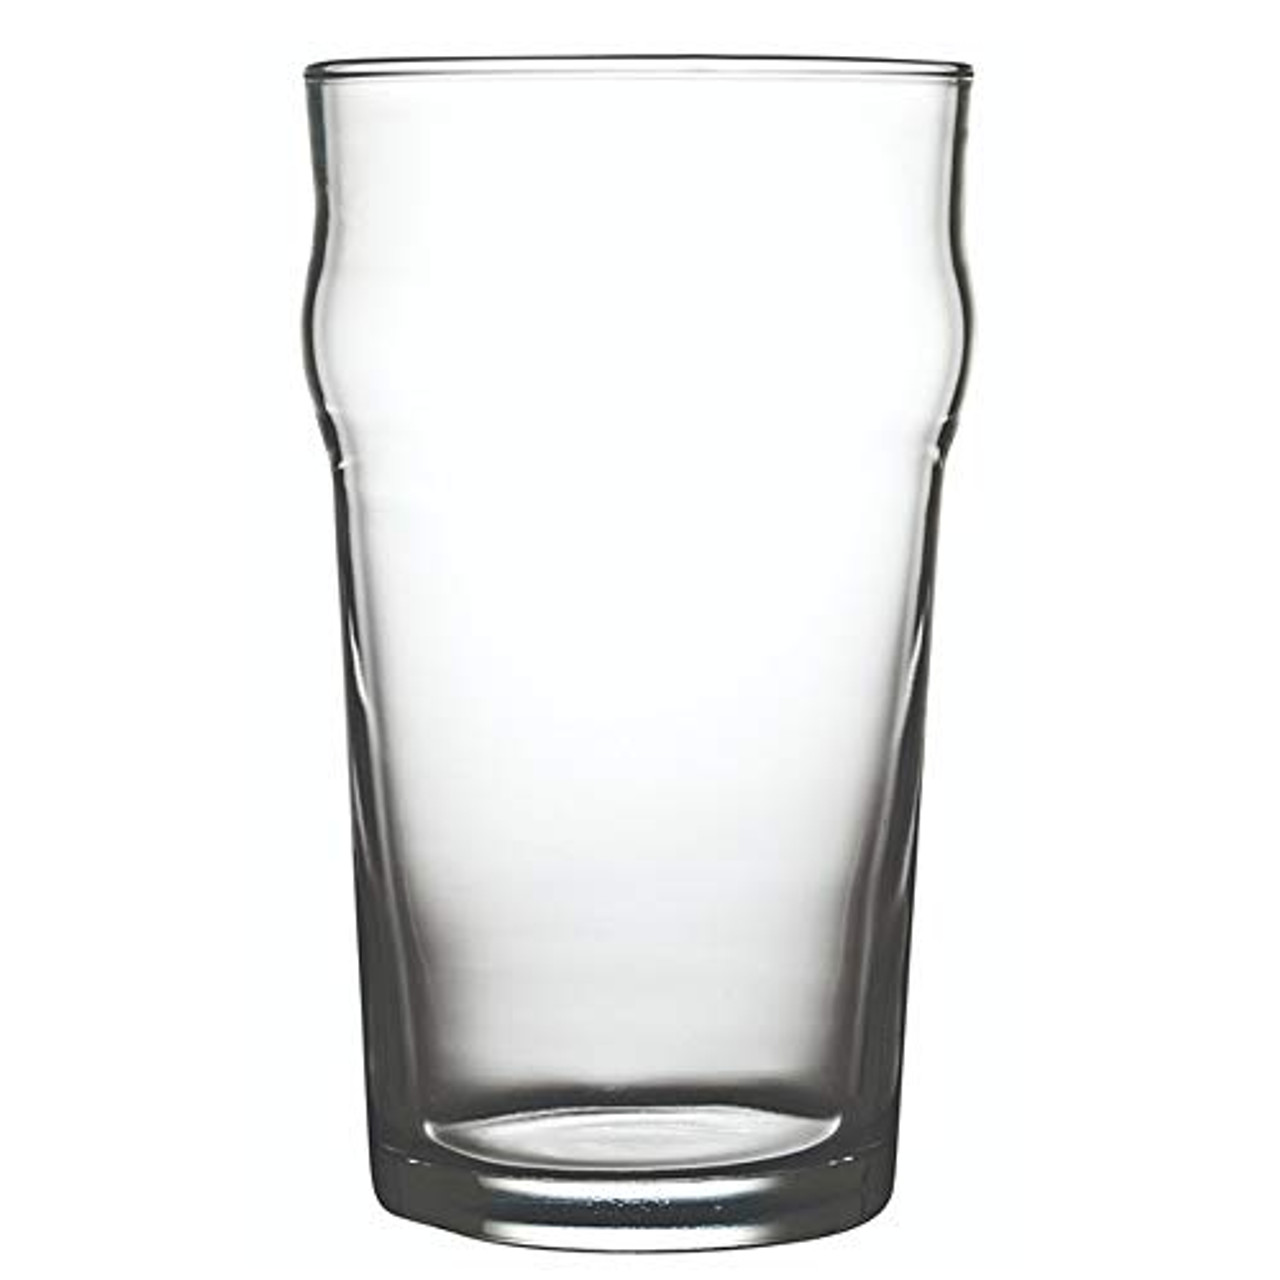 Nonic Pint Glass Dimensions & Drawings